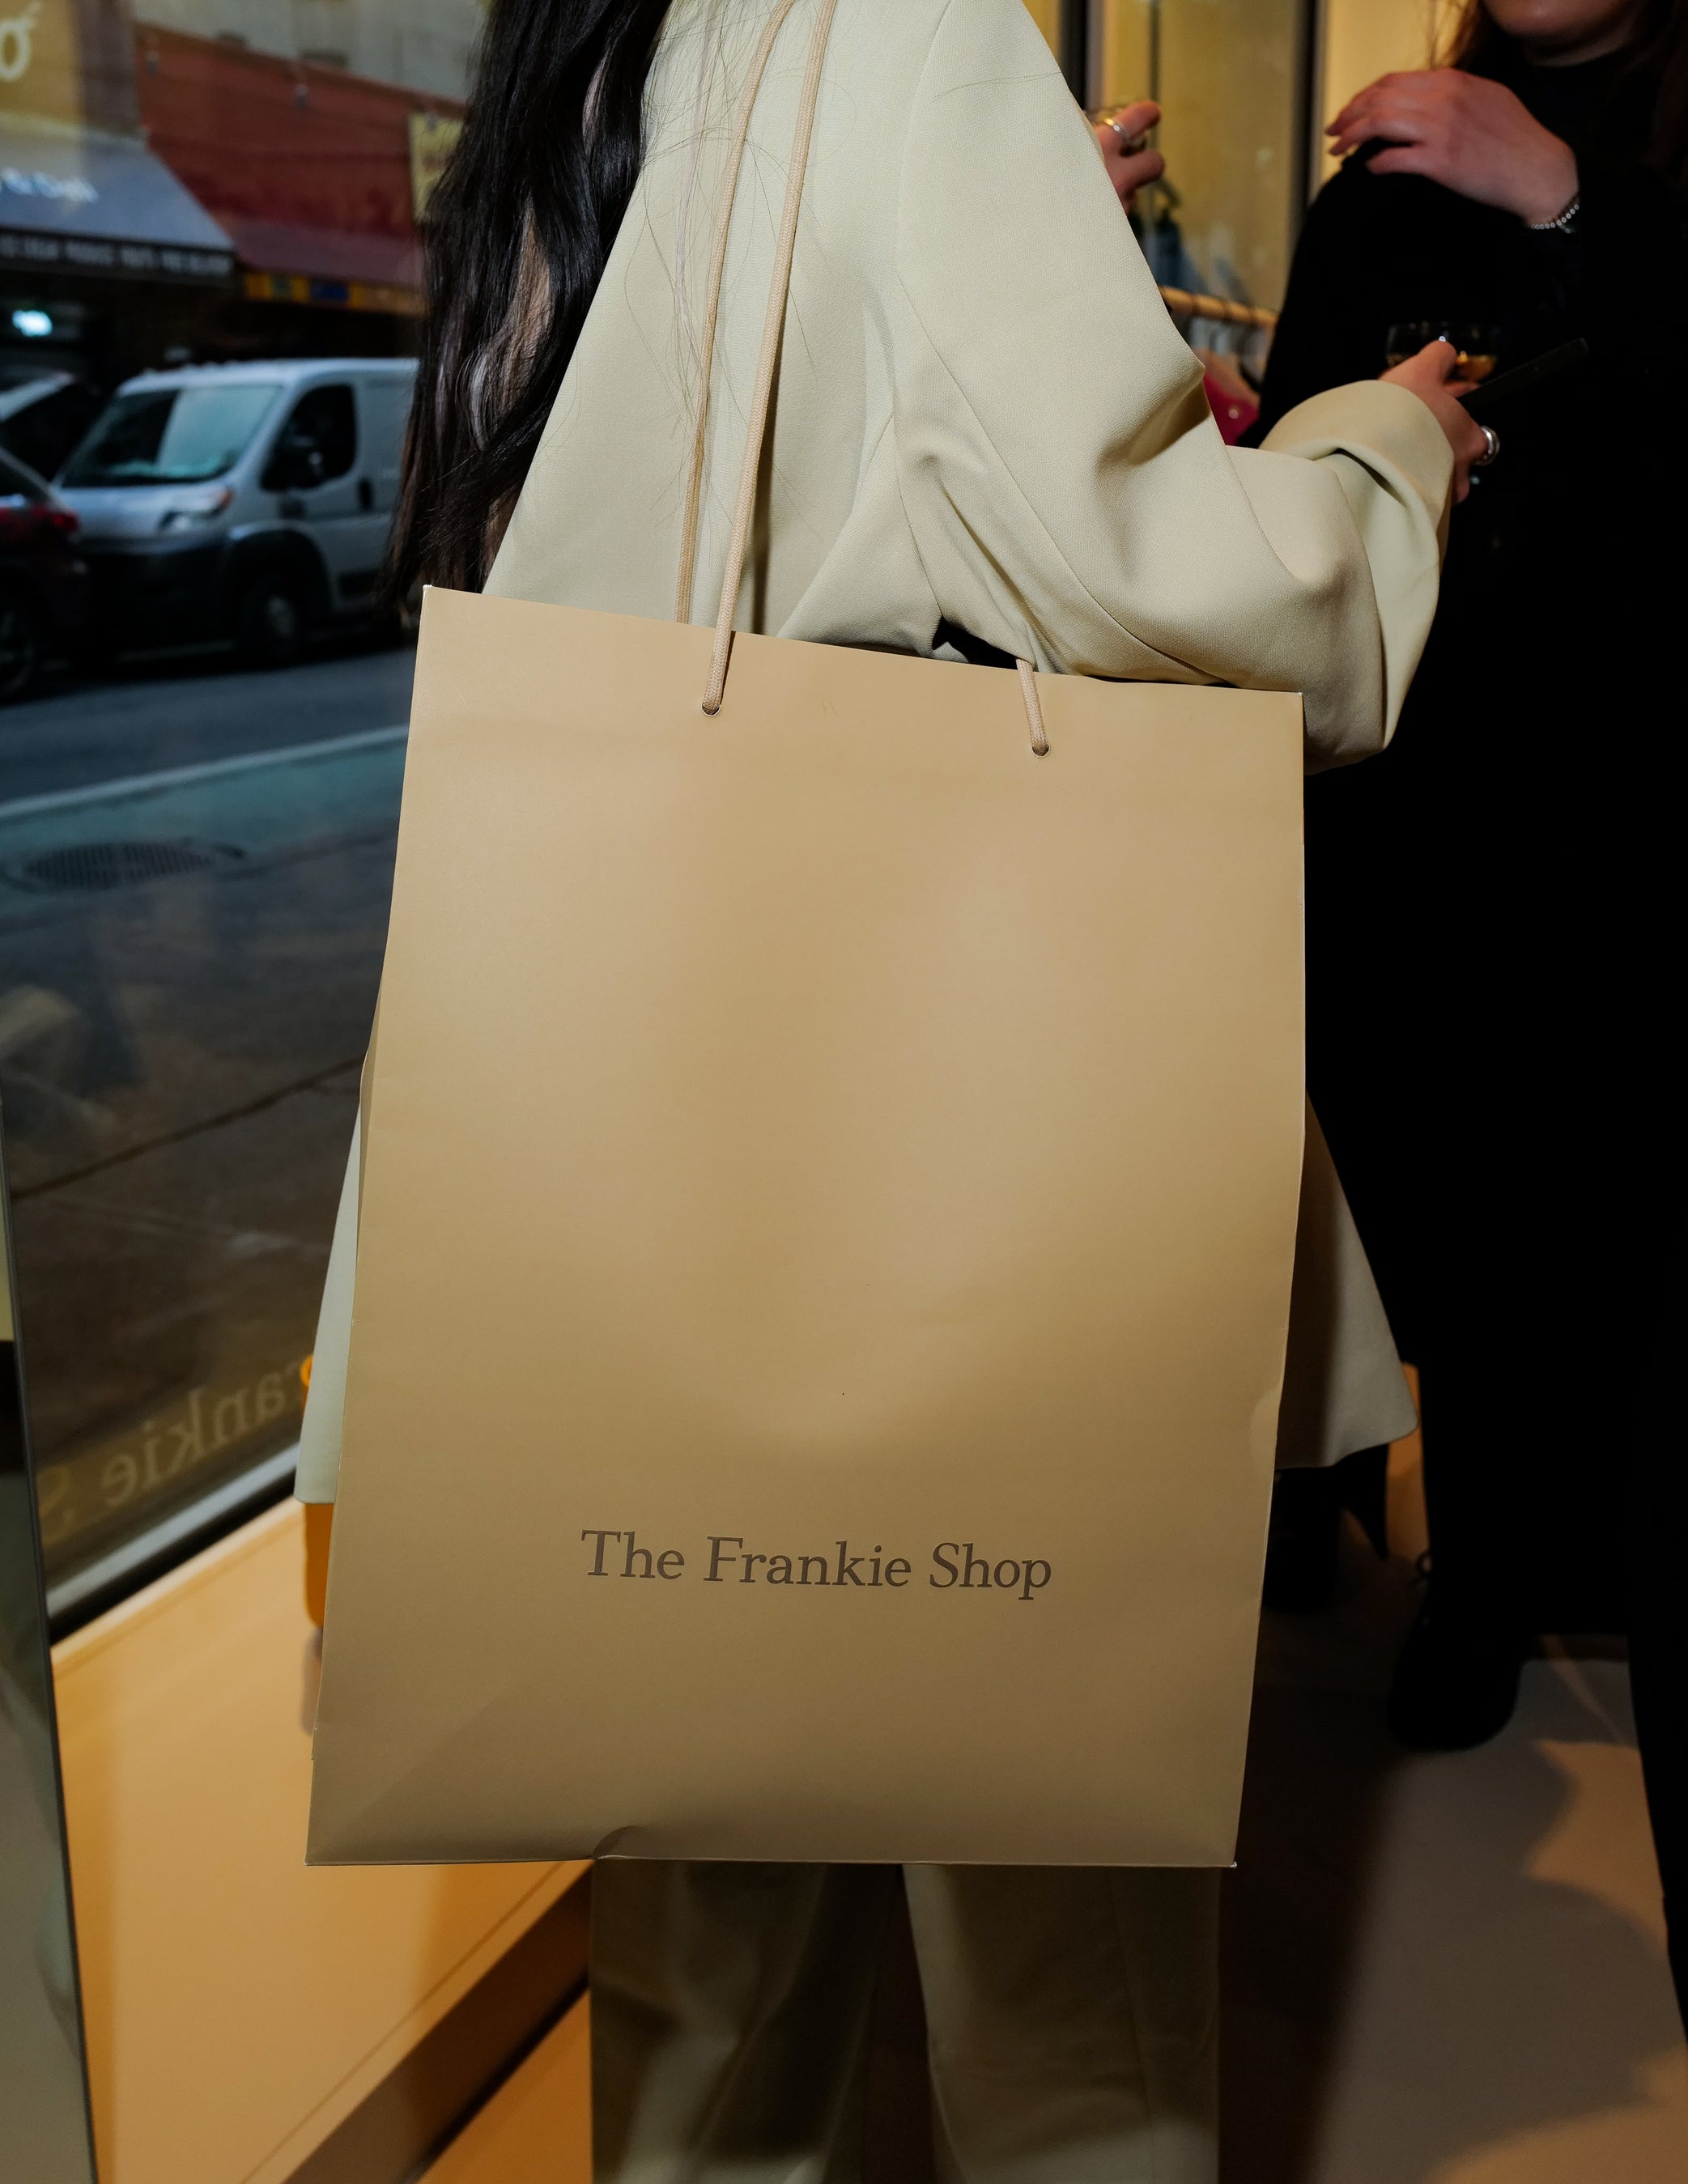 Image of the Frankie Shop shopping bag.